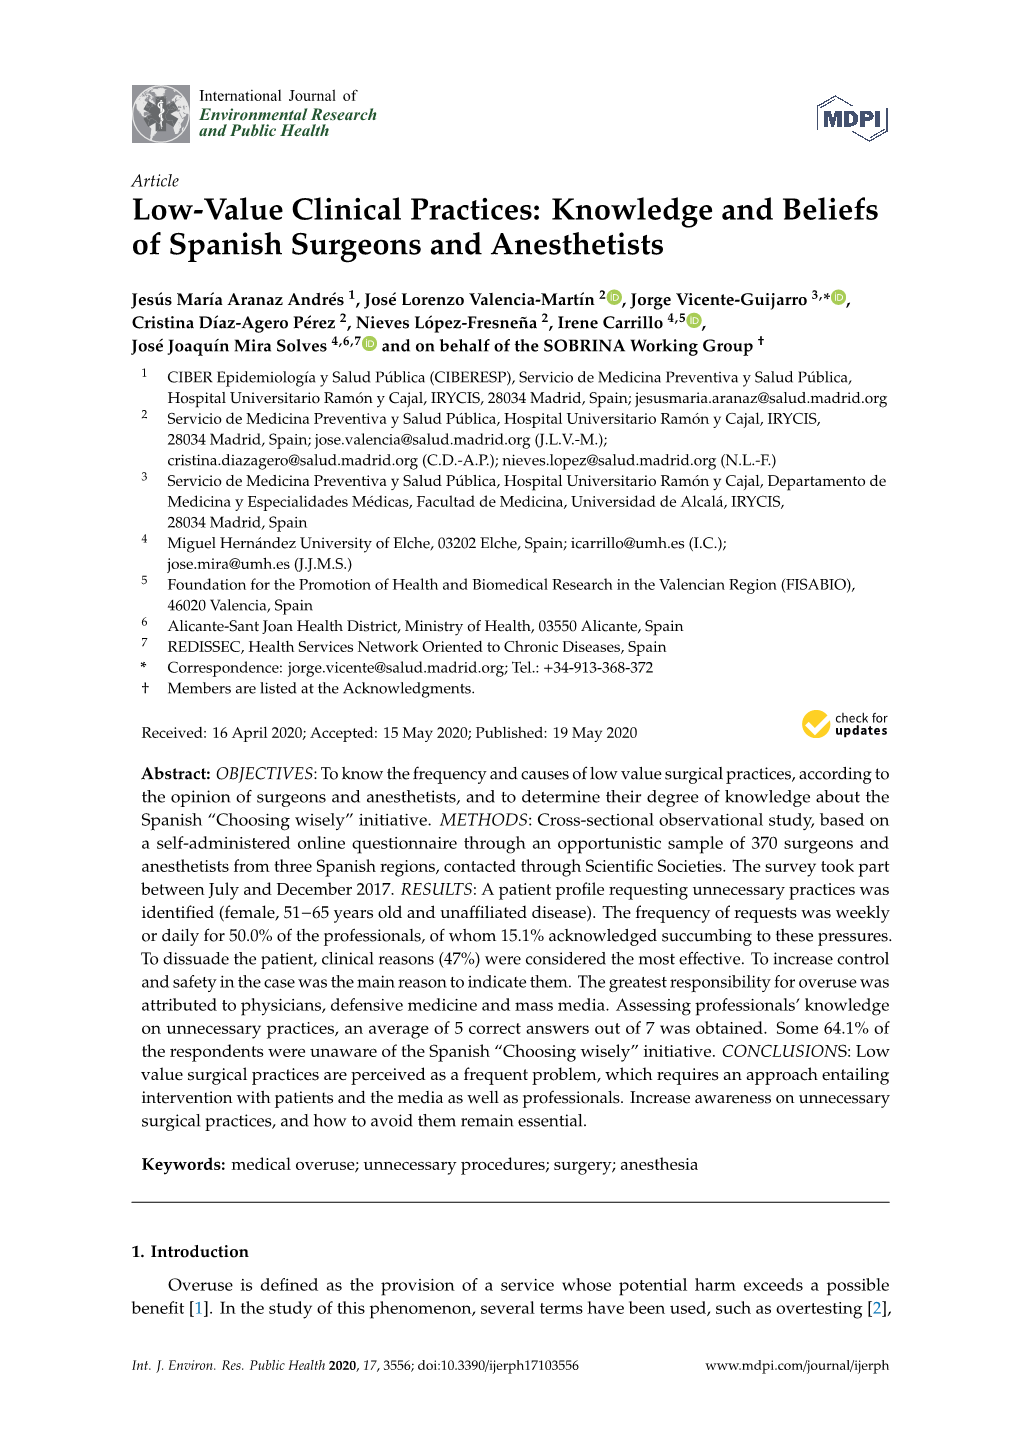 Low-Value Clinical Practices: Knowledge and Beliefs of Spanish Surgeons and Anesthetists